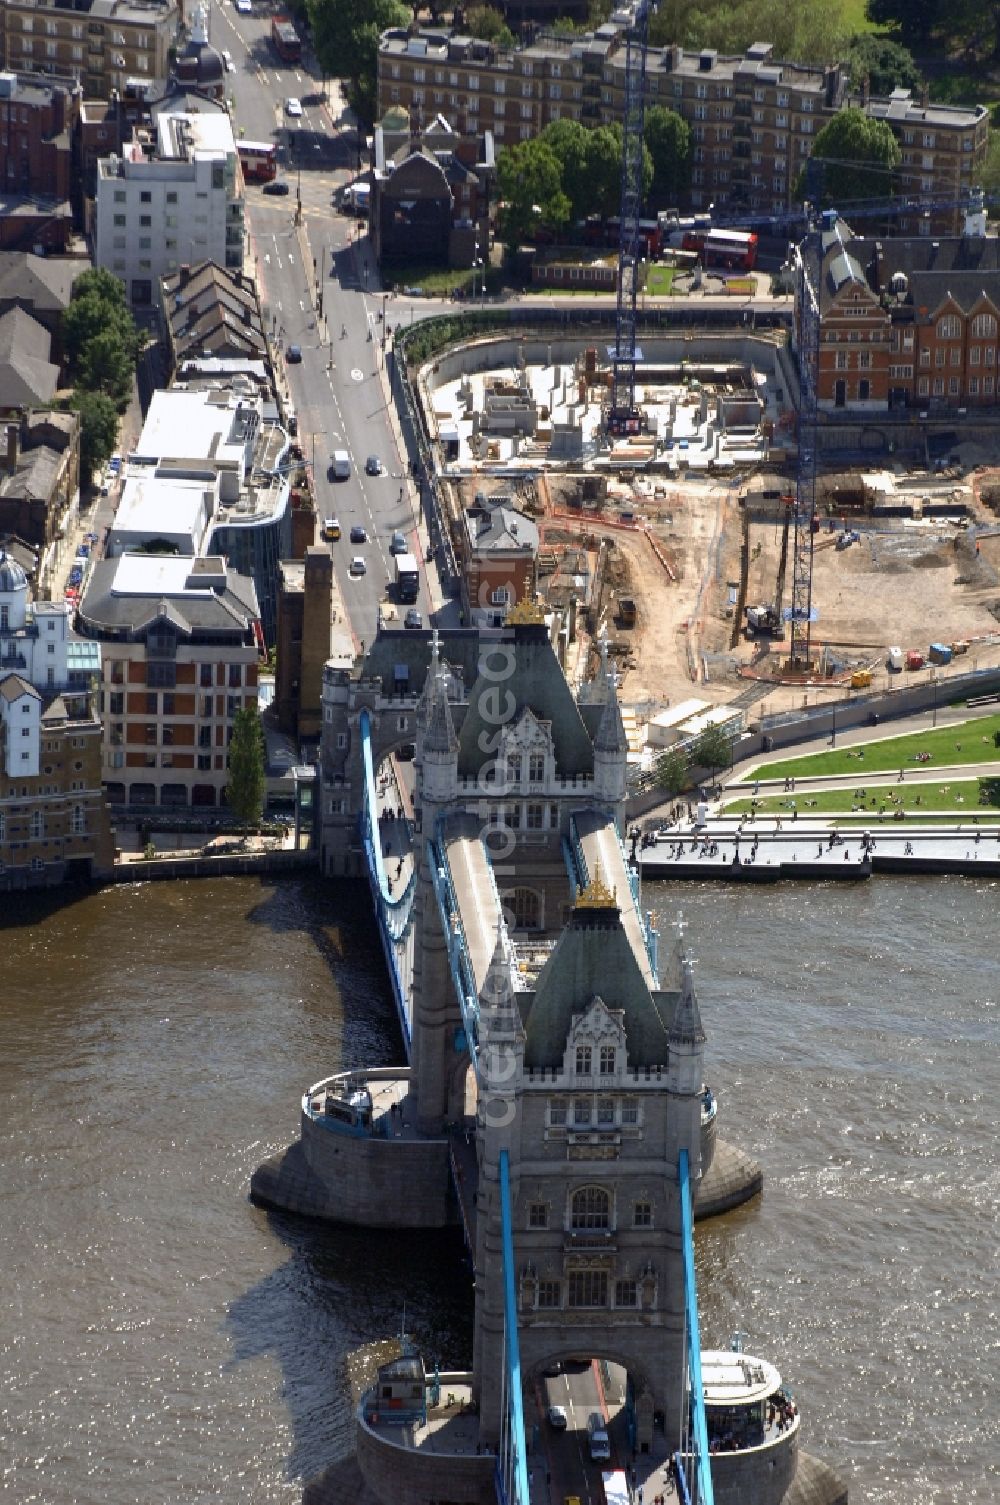 London from above - View of Tower Bridge on the banks of the Thames - the symbol of London